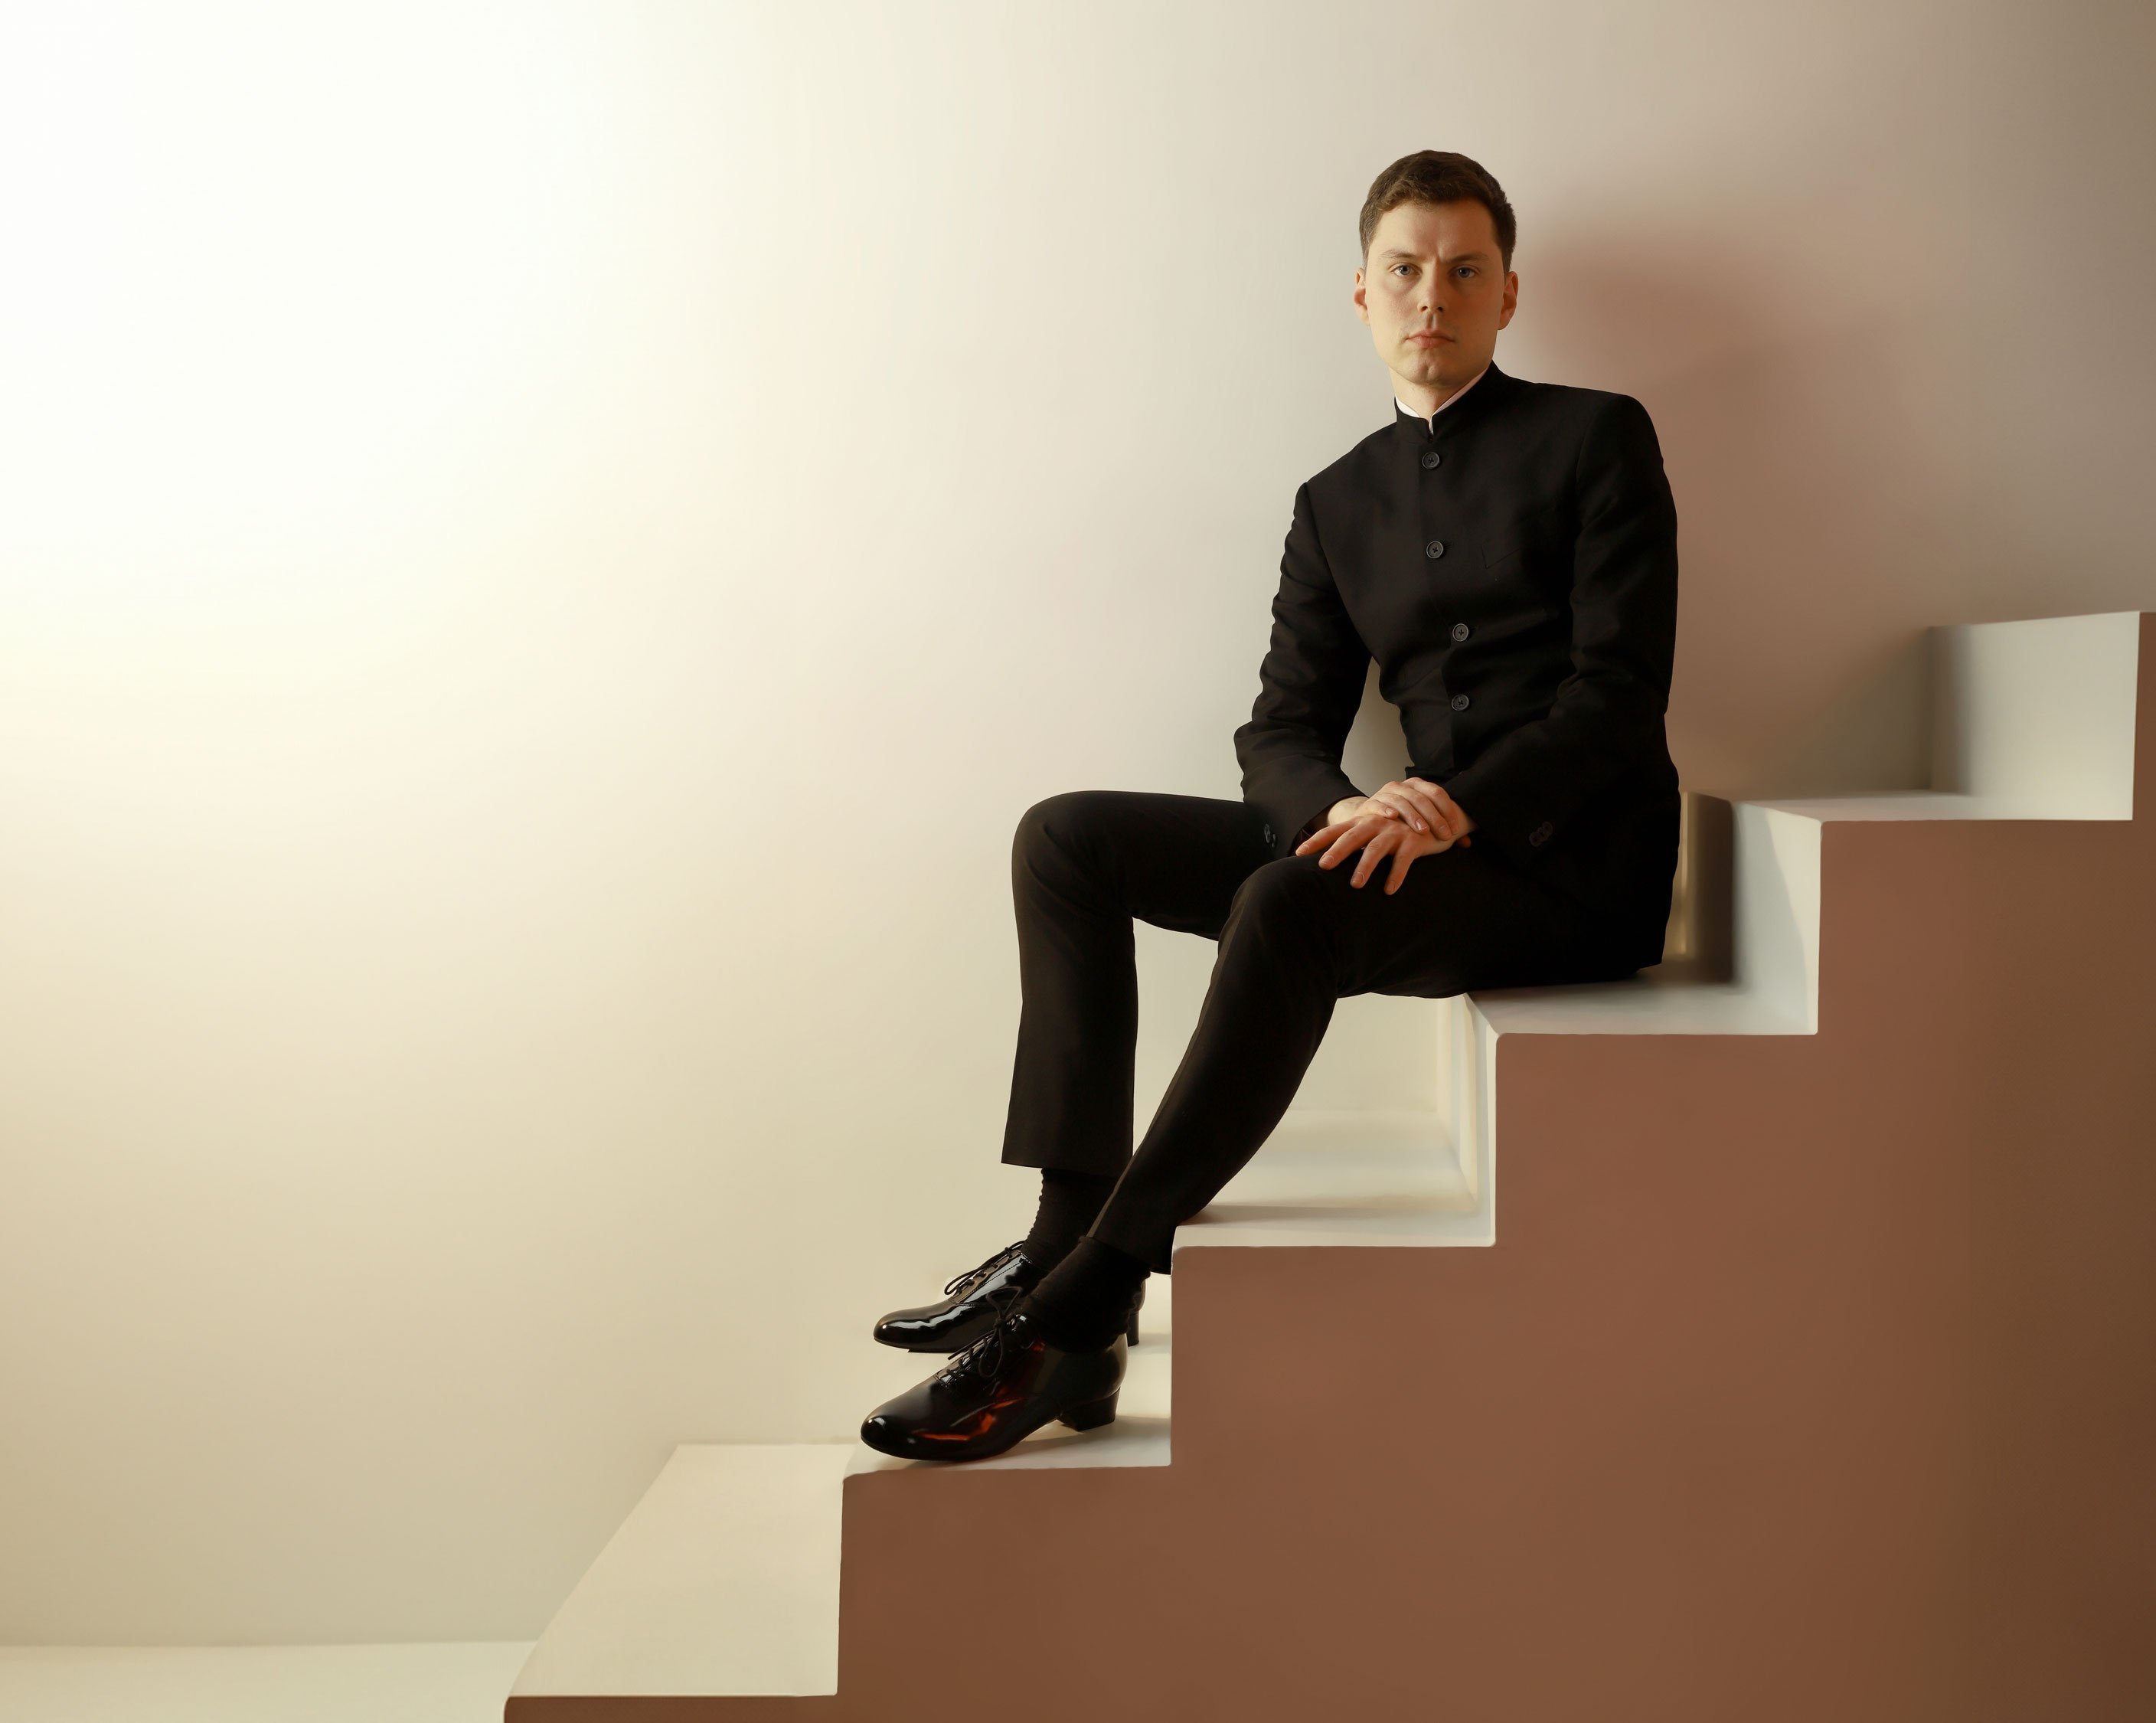 Richard Gowers sits on a staircase in a suit